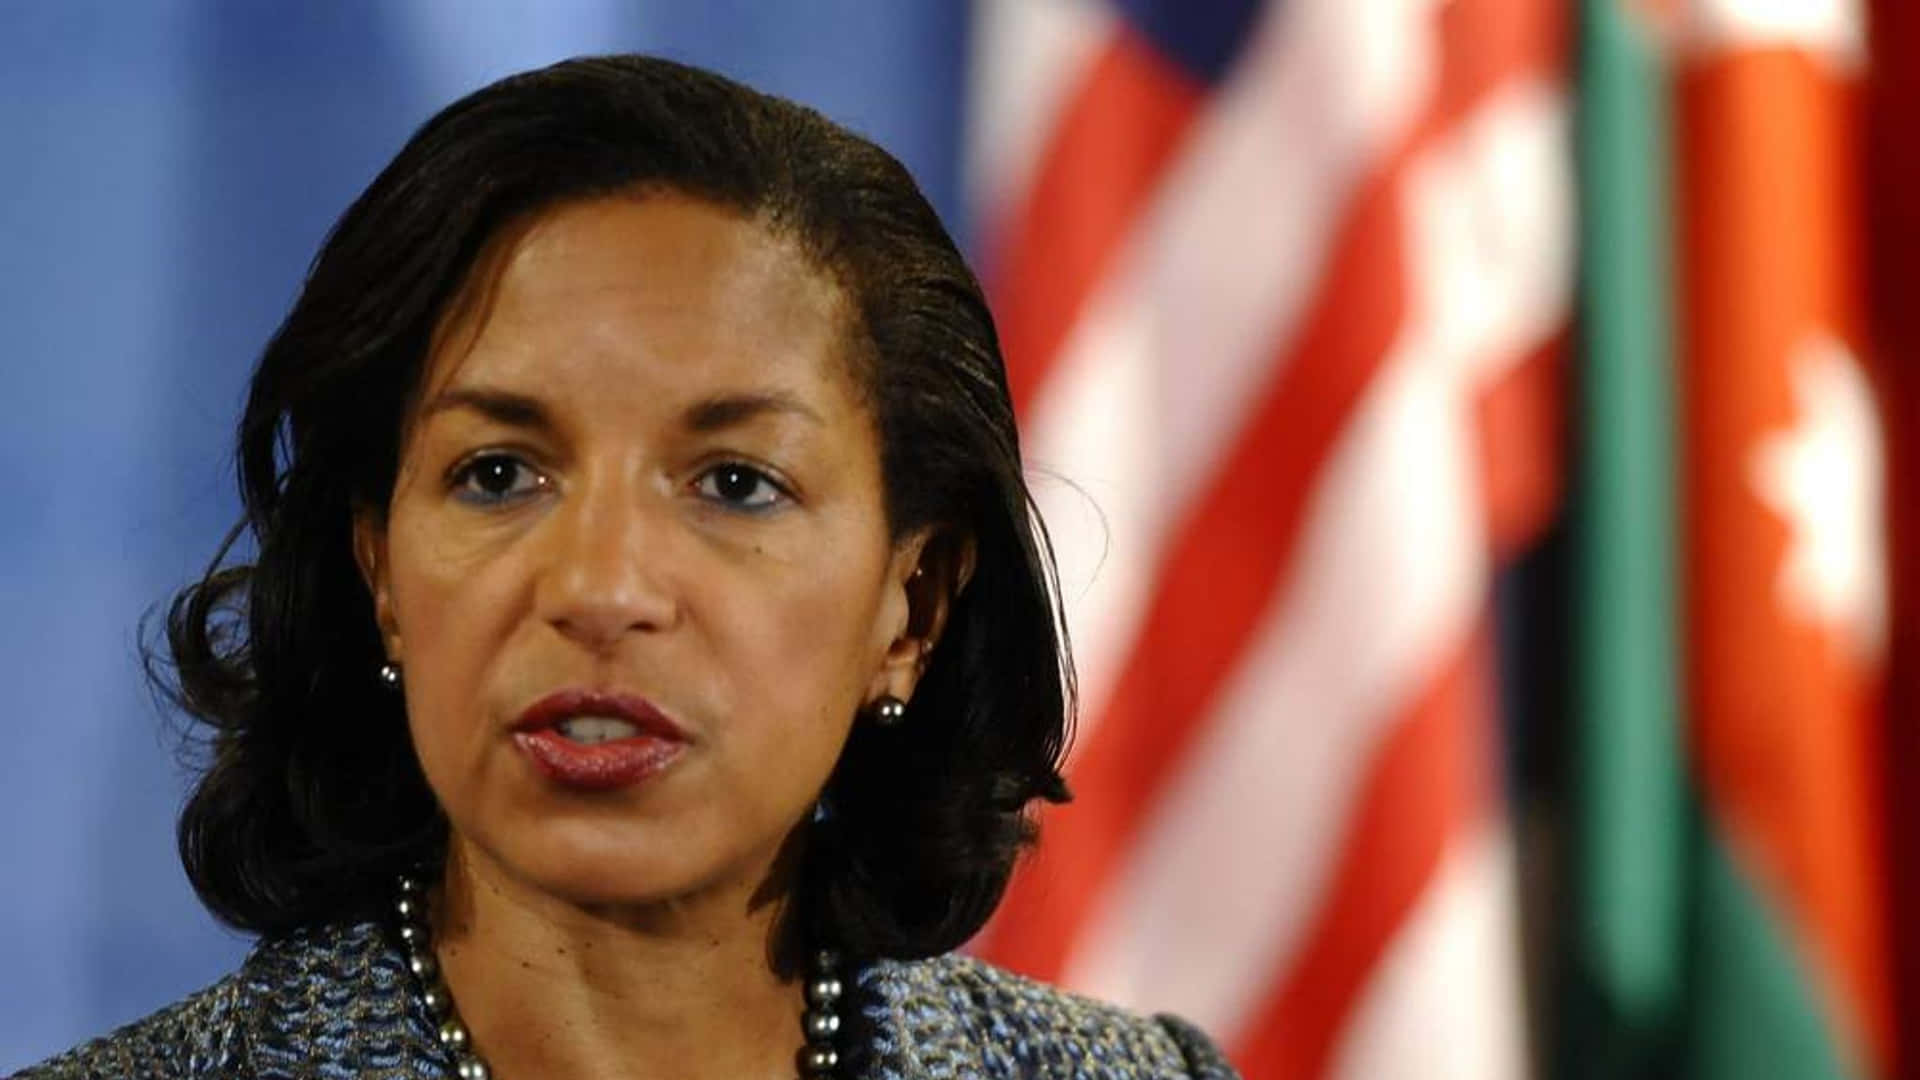 Susan Rice Speakingwith Flags Background Wallpaper